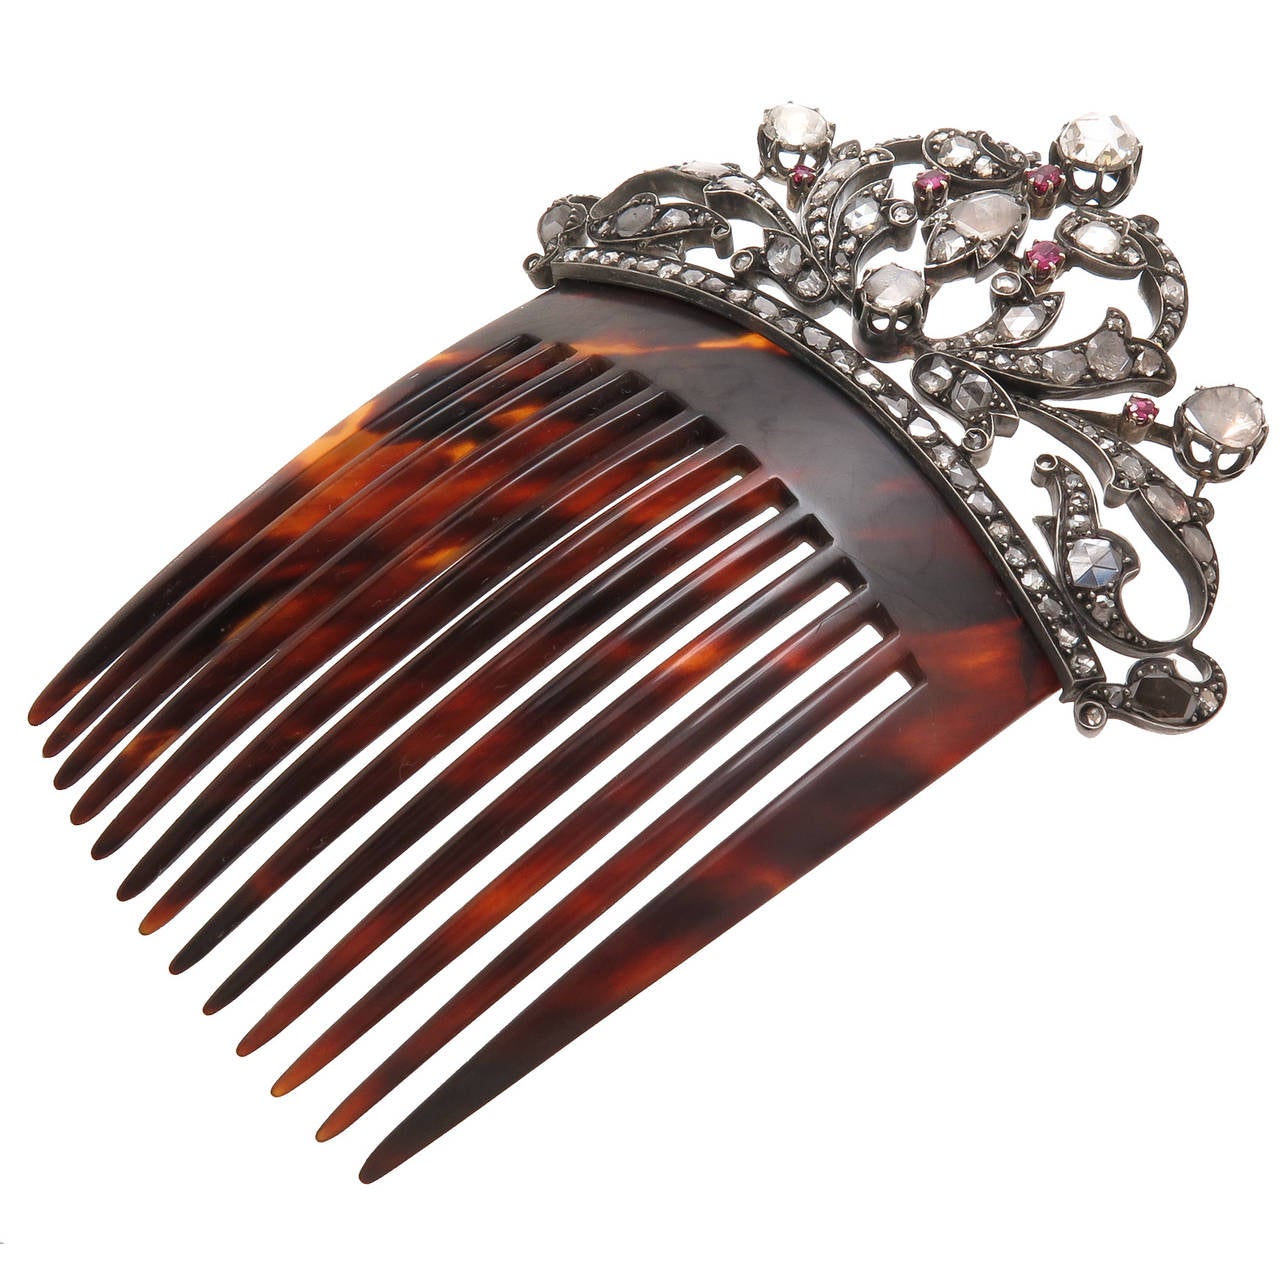 Circa 1900 Silver Top with Gold back and Tortoise Shell Hair Comb, set with approximately 5 carats of Rose cut Diamonds of varying sizes and further set with Rubies. The diamonds have a lot of life and give off a lot off sparkle. Larger than most